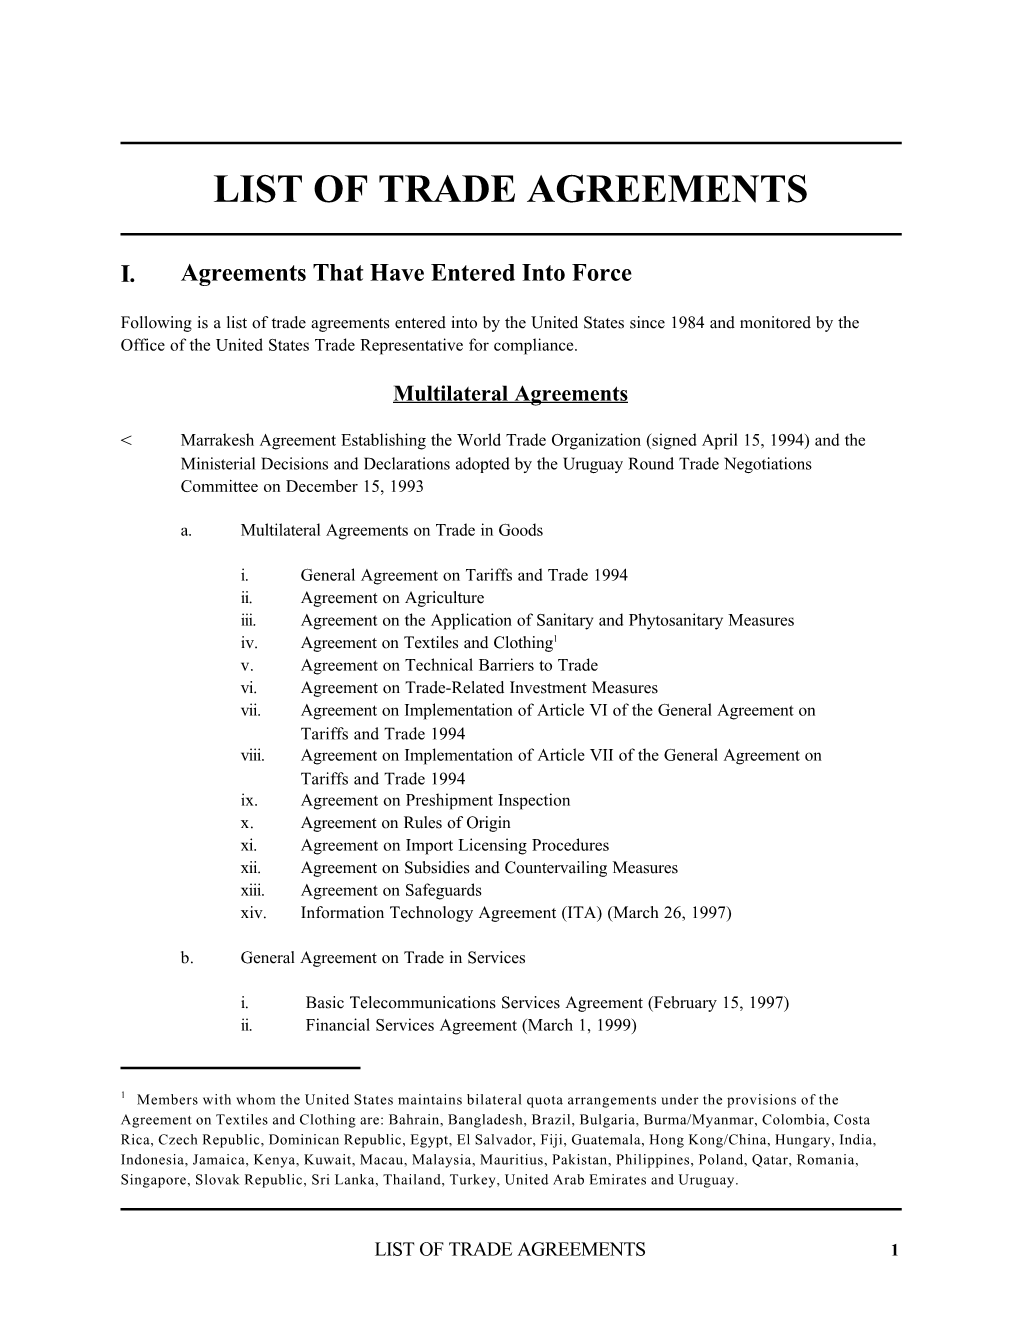 List of Trade Agreements